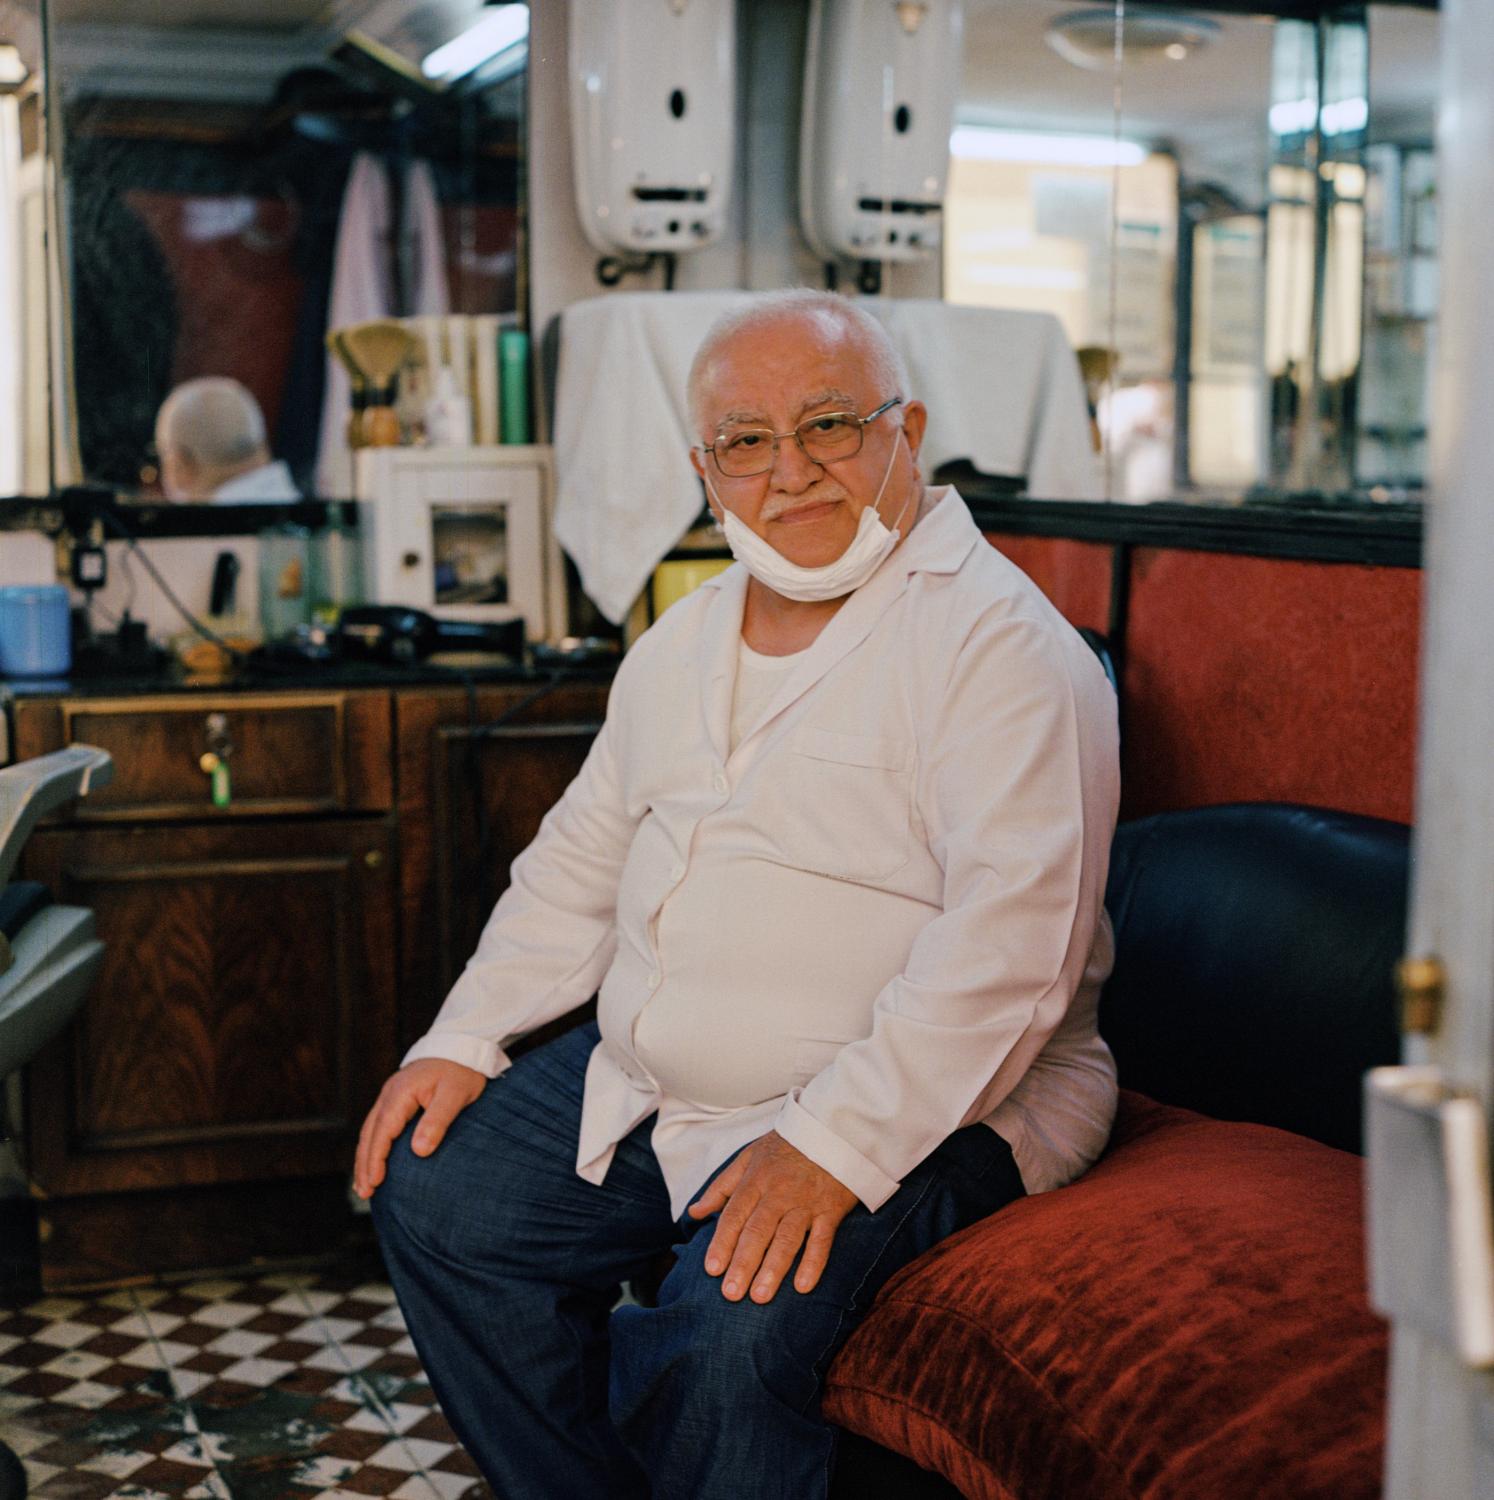 Istanbul: A Lockdown Diary - Now in his mid-seventies, Kemal took over his barber shop...